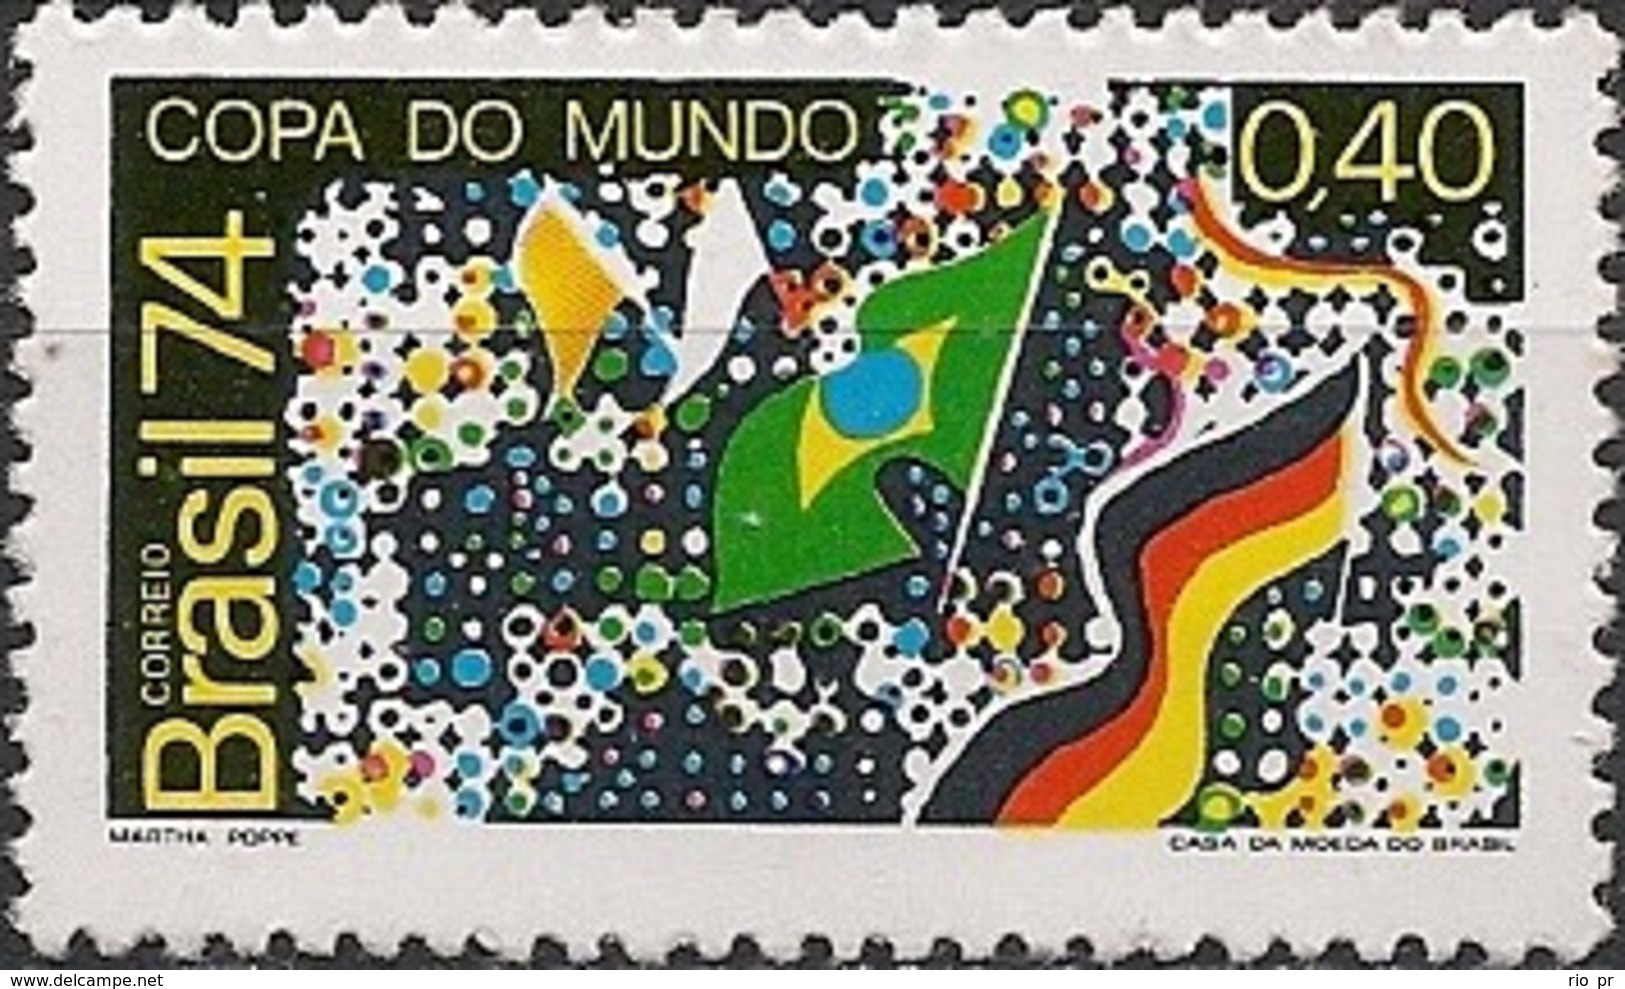 BRAZIL - WEST GERMANY'74 FIFA WORLD SOCCER CUP 1974 - MNH - 1974 – Alemania Occidental